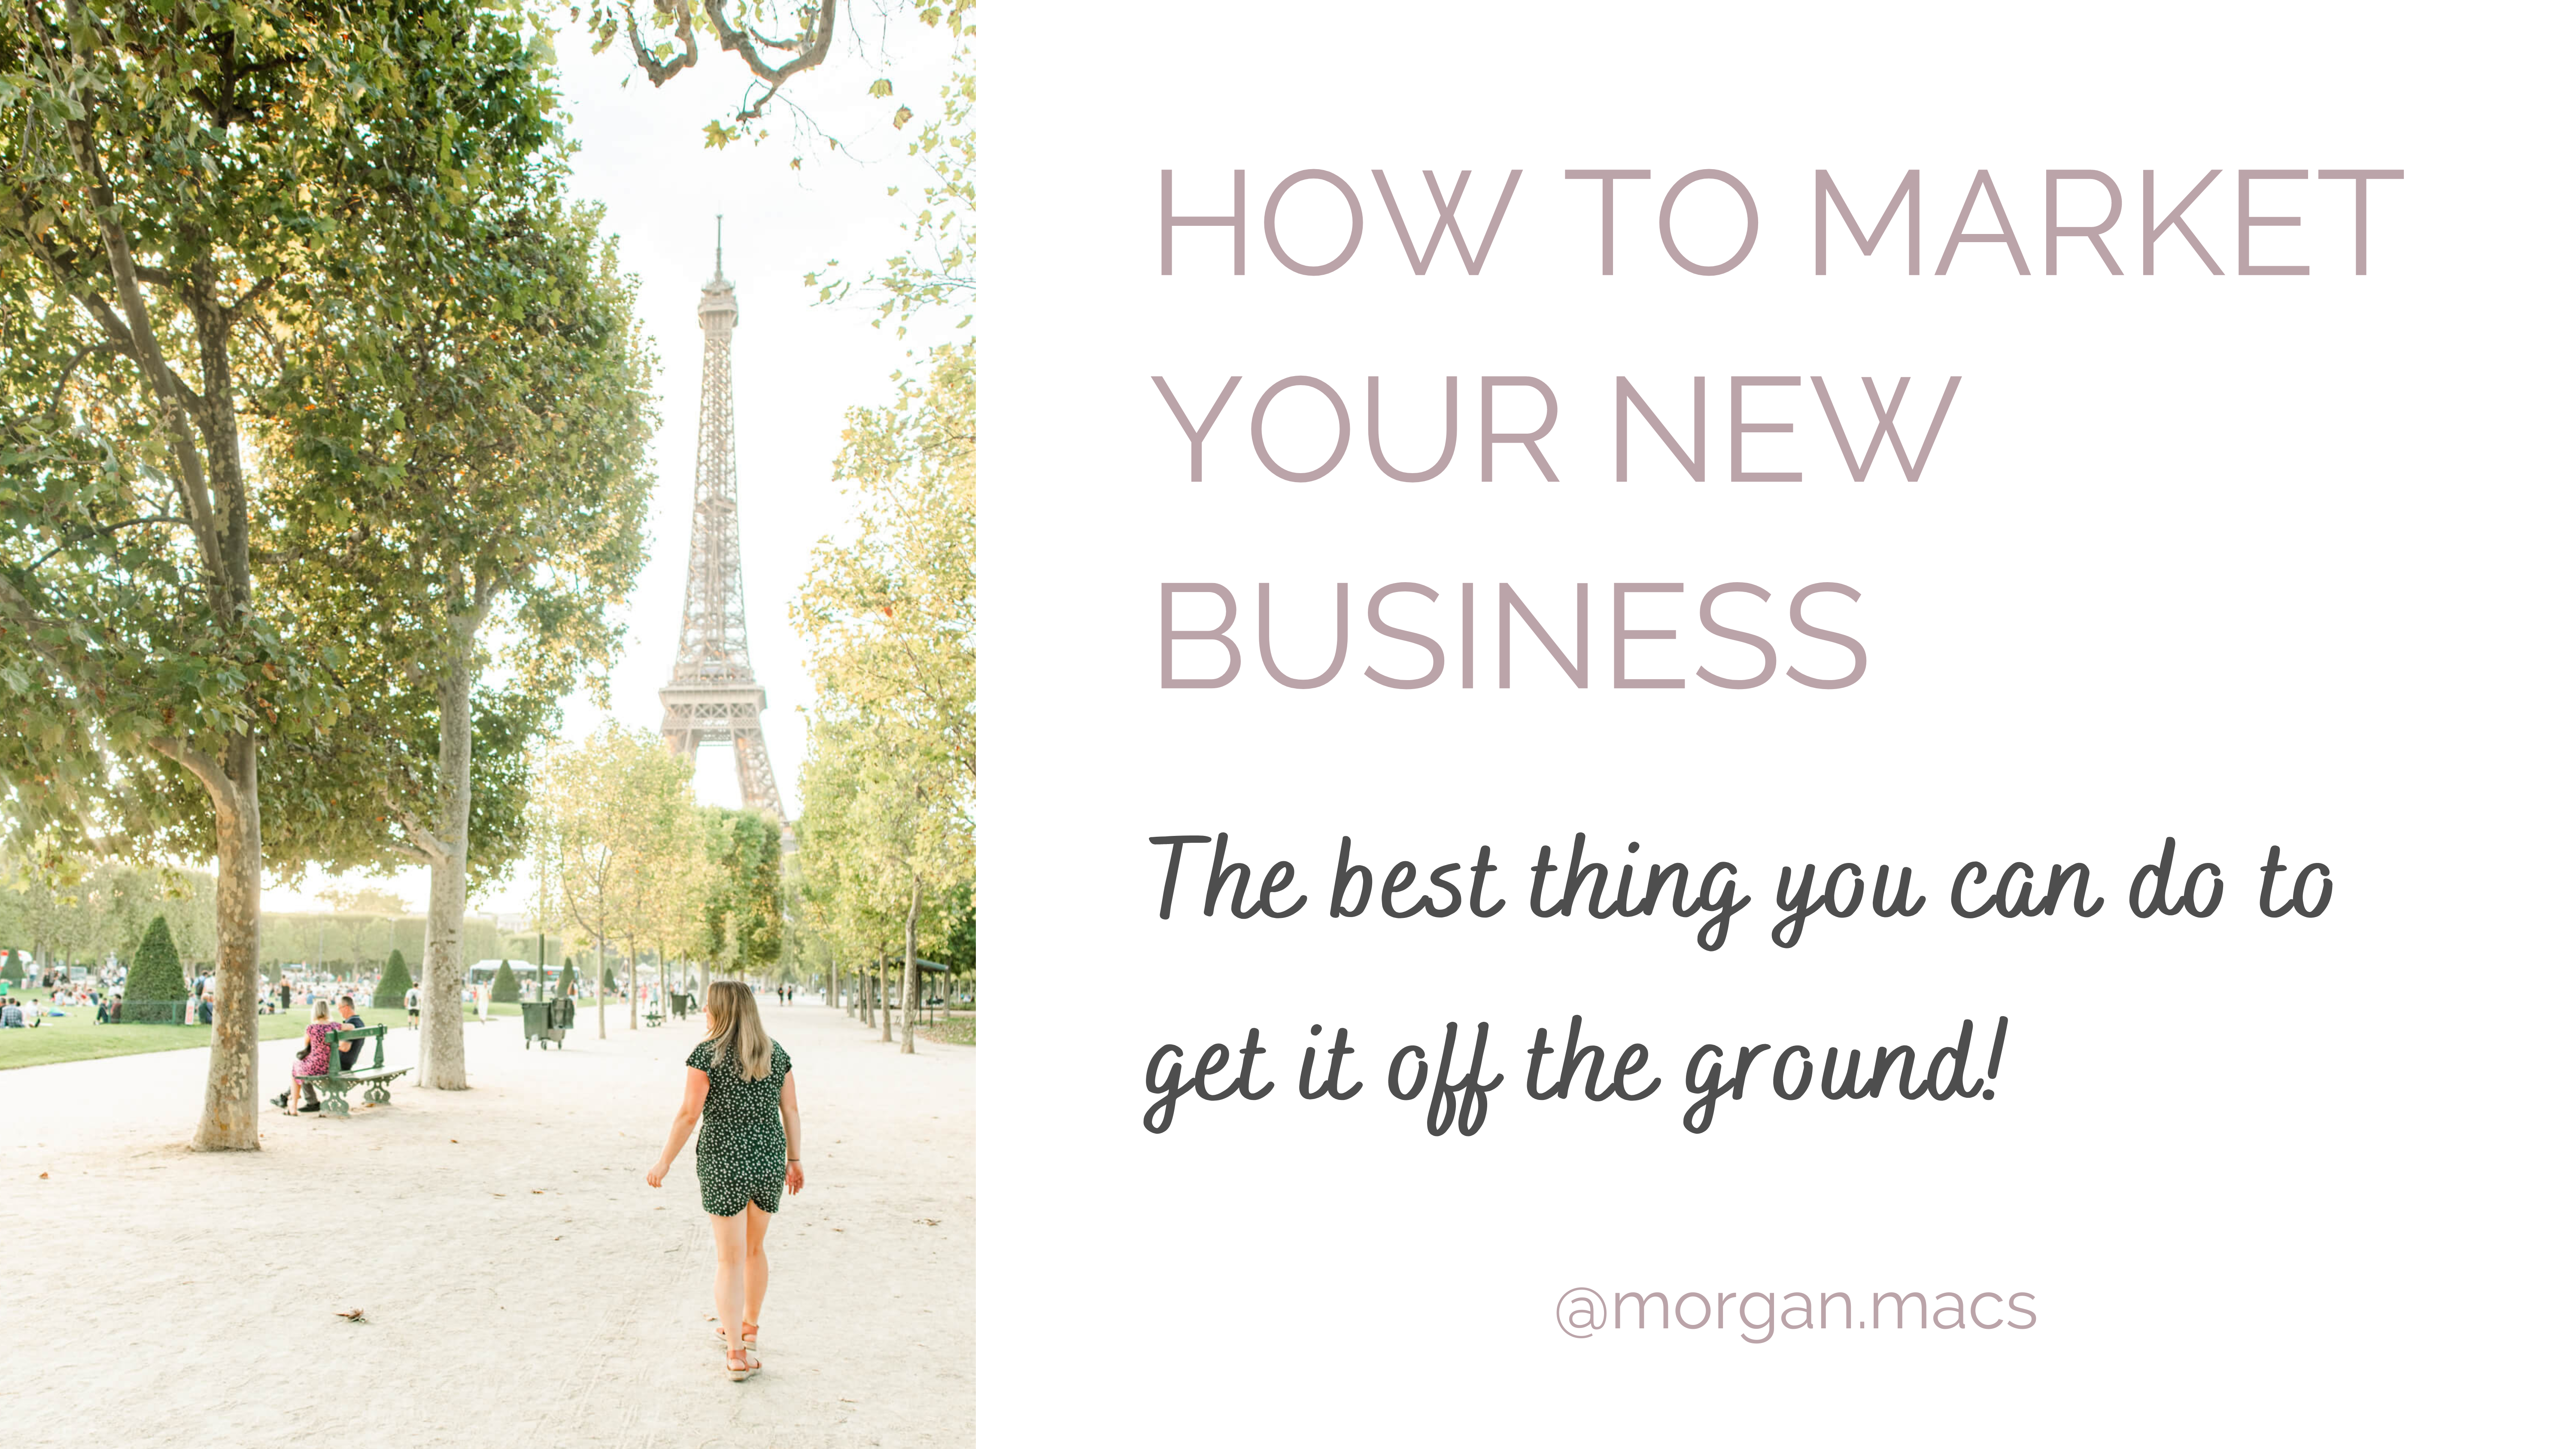 Text on page: How to market your new business: The best thing you can do to get it off the ground